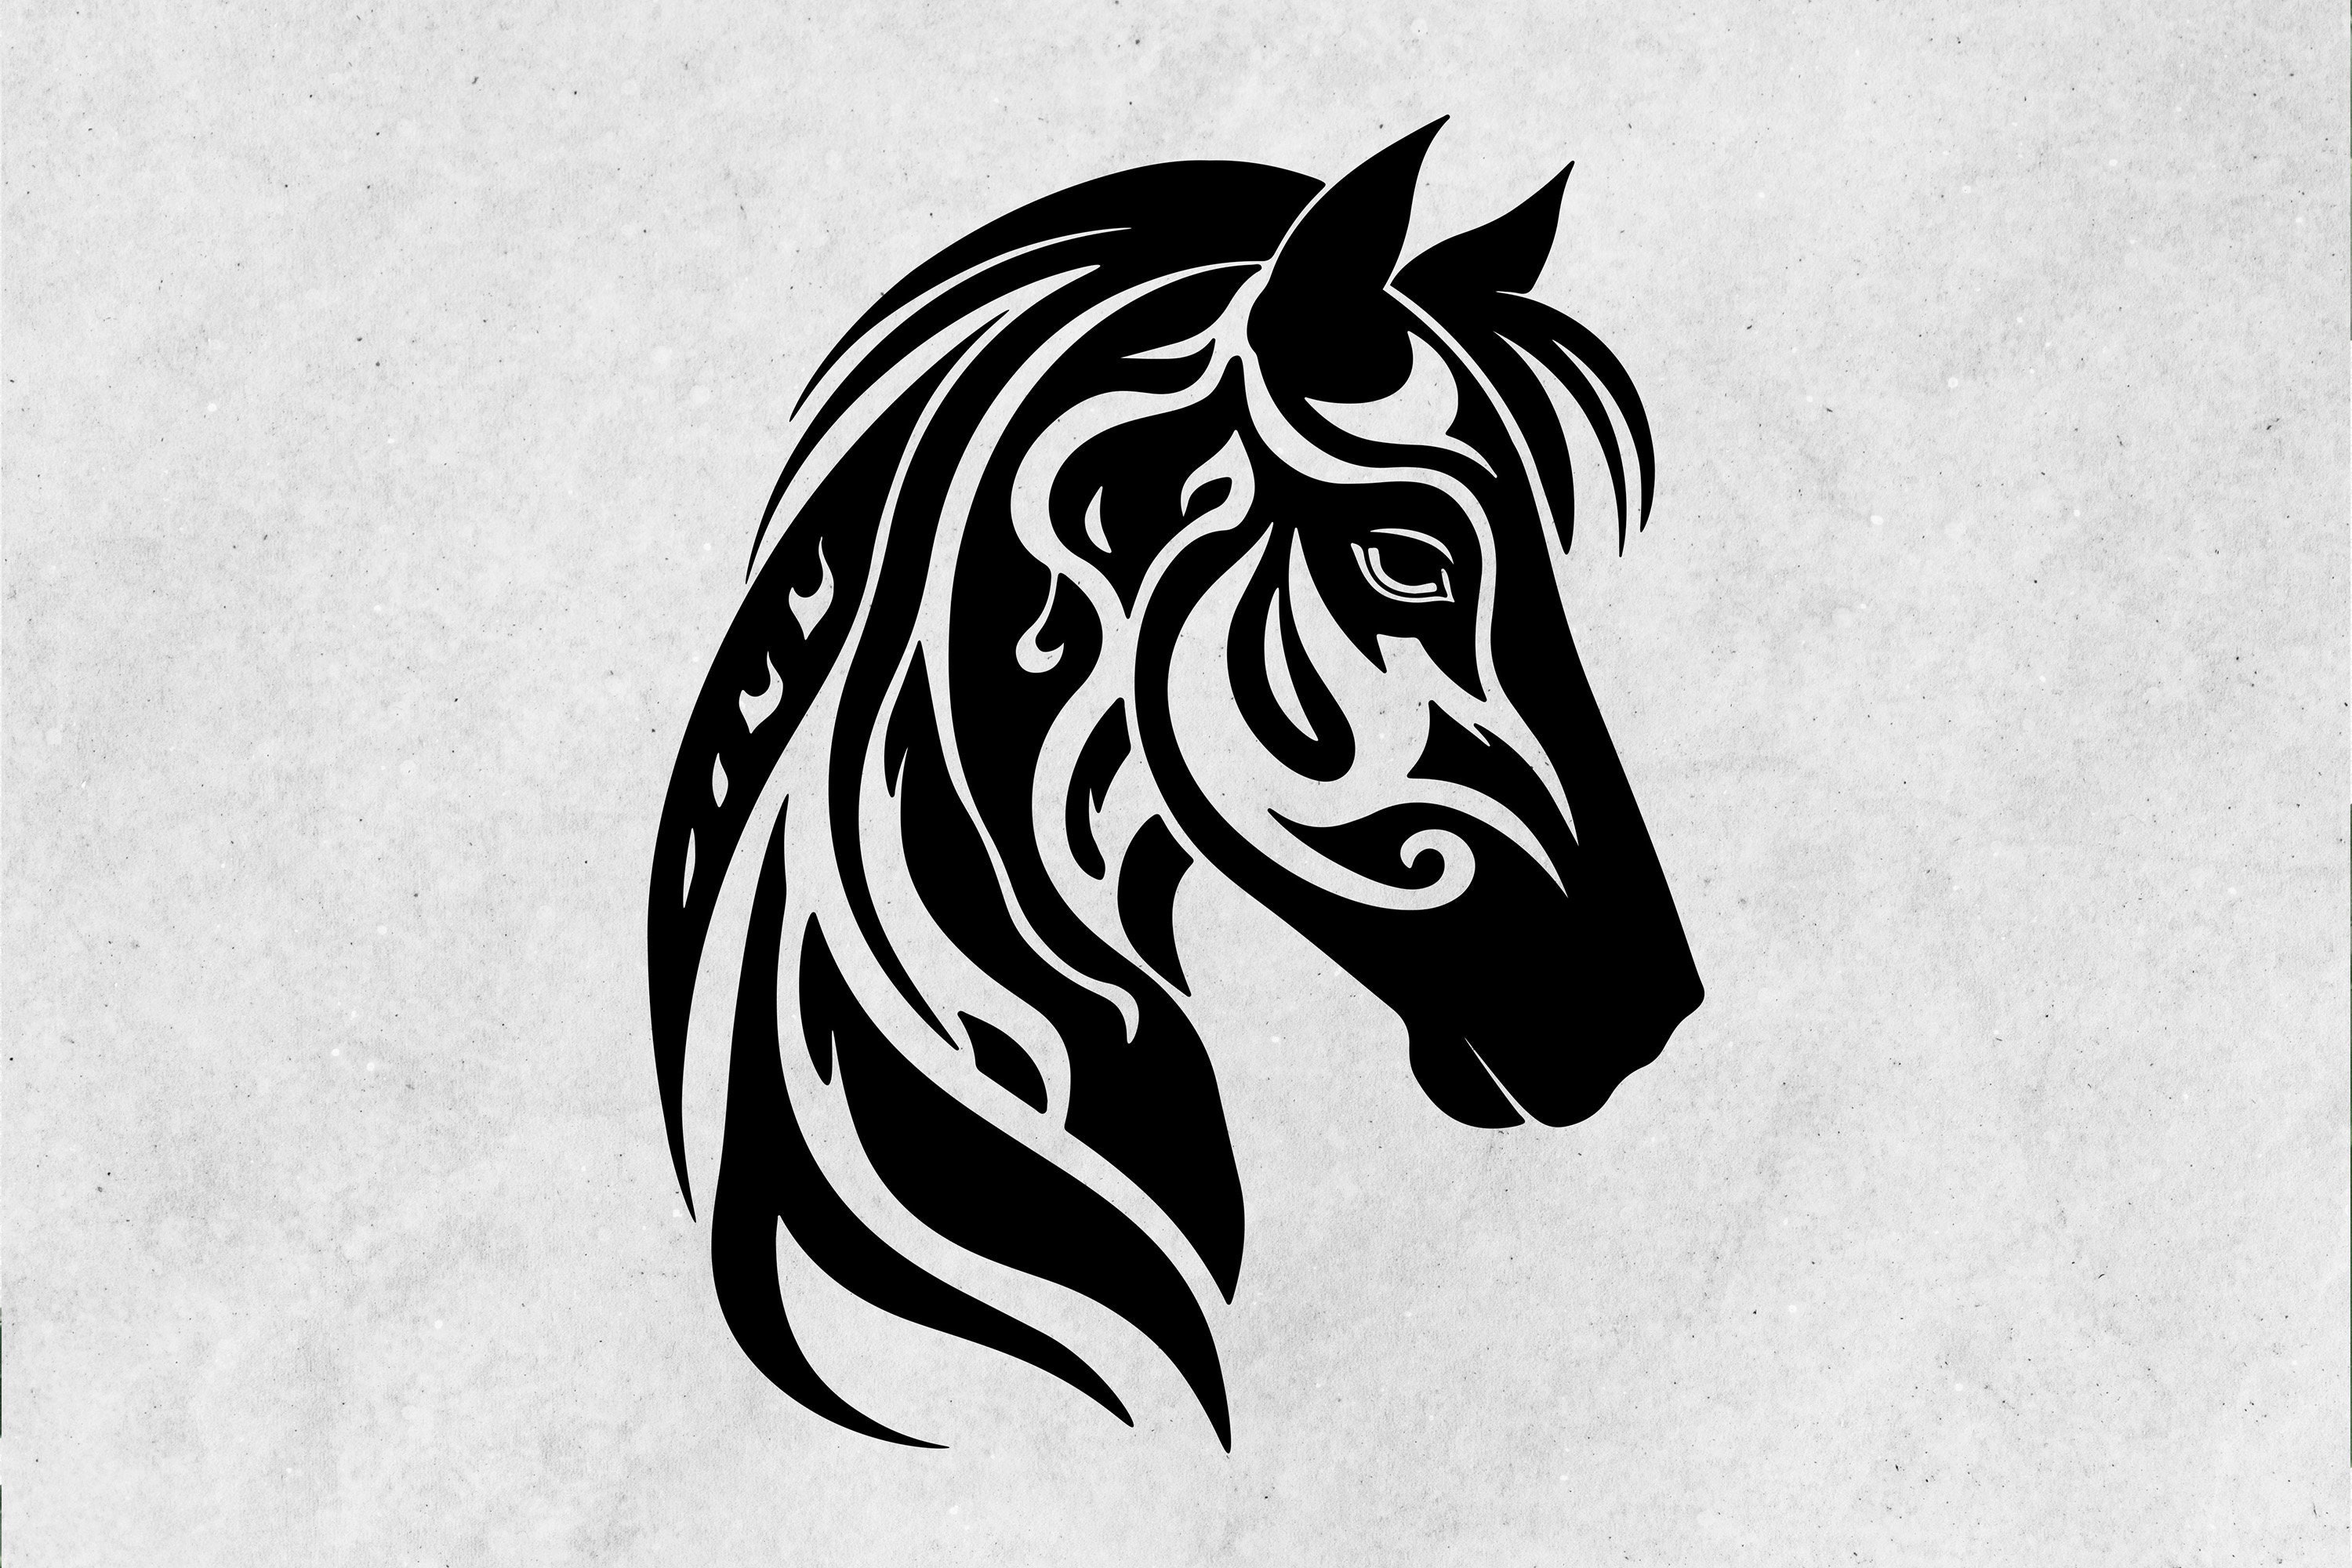 tribal horse tattoo designs' Mouse Pad | Spreadshirt